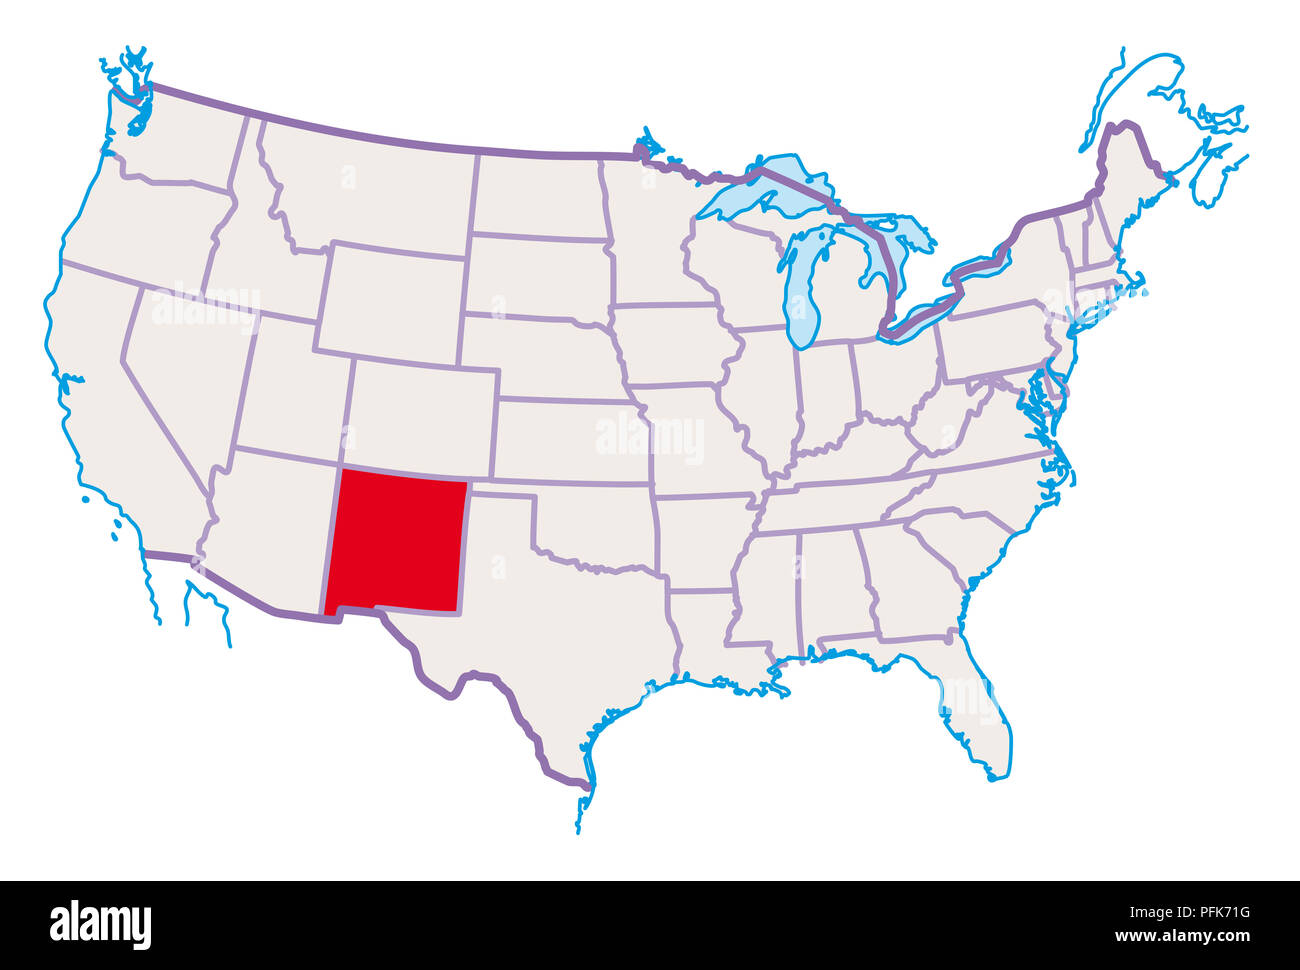 new mexico on map Map Of Usa New Mexico Highlighted In Red Stock Photo Alamy